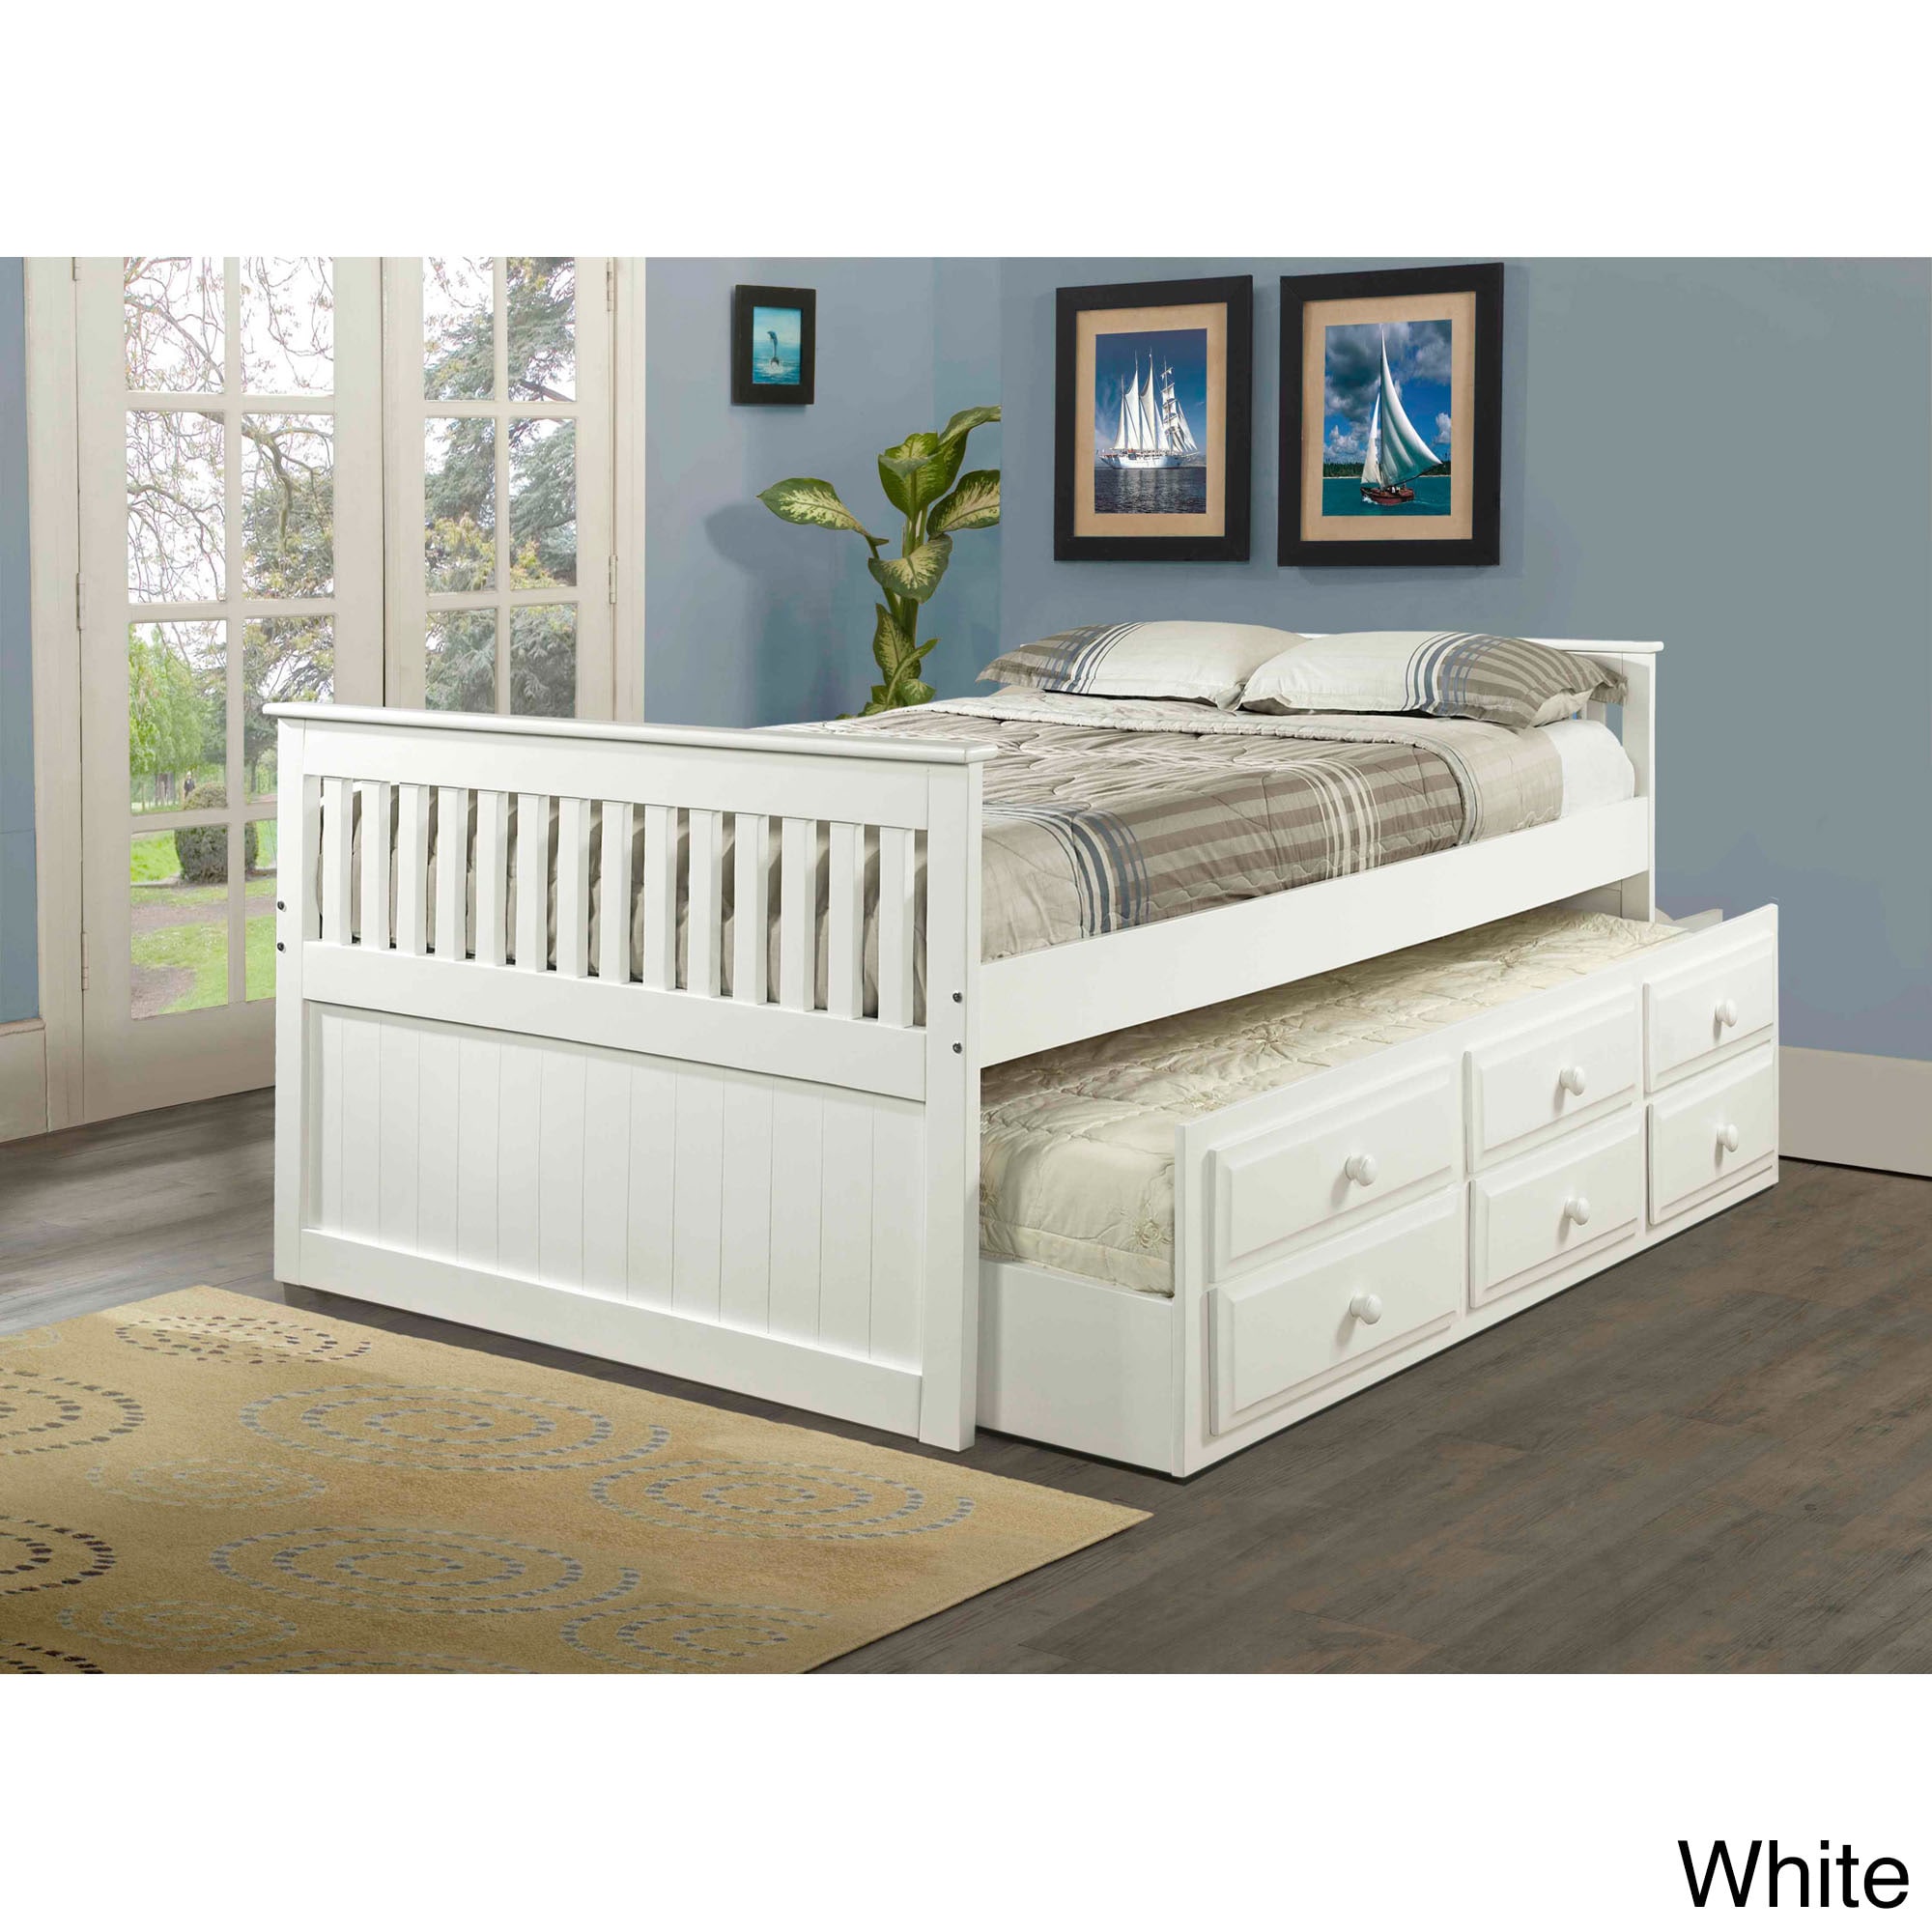 Donco Kids Donco Kids Mission Honey Captains Trundle Full size Bed White Size Full